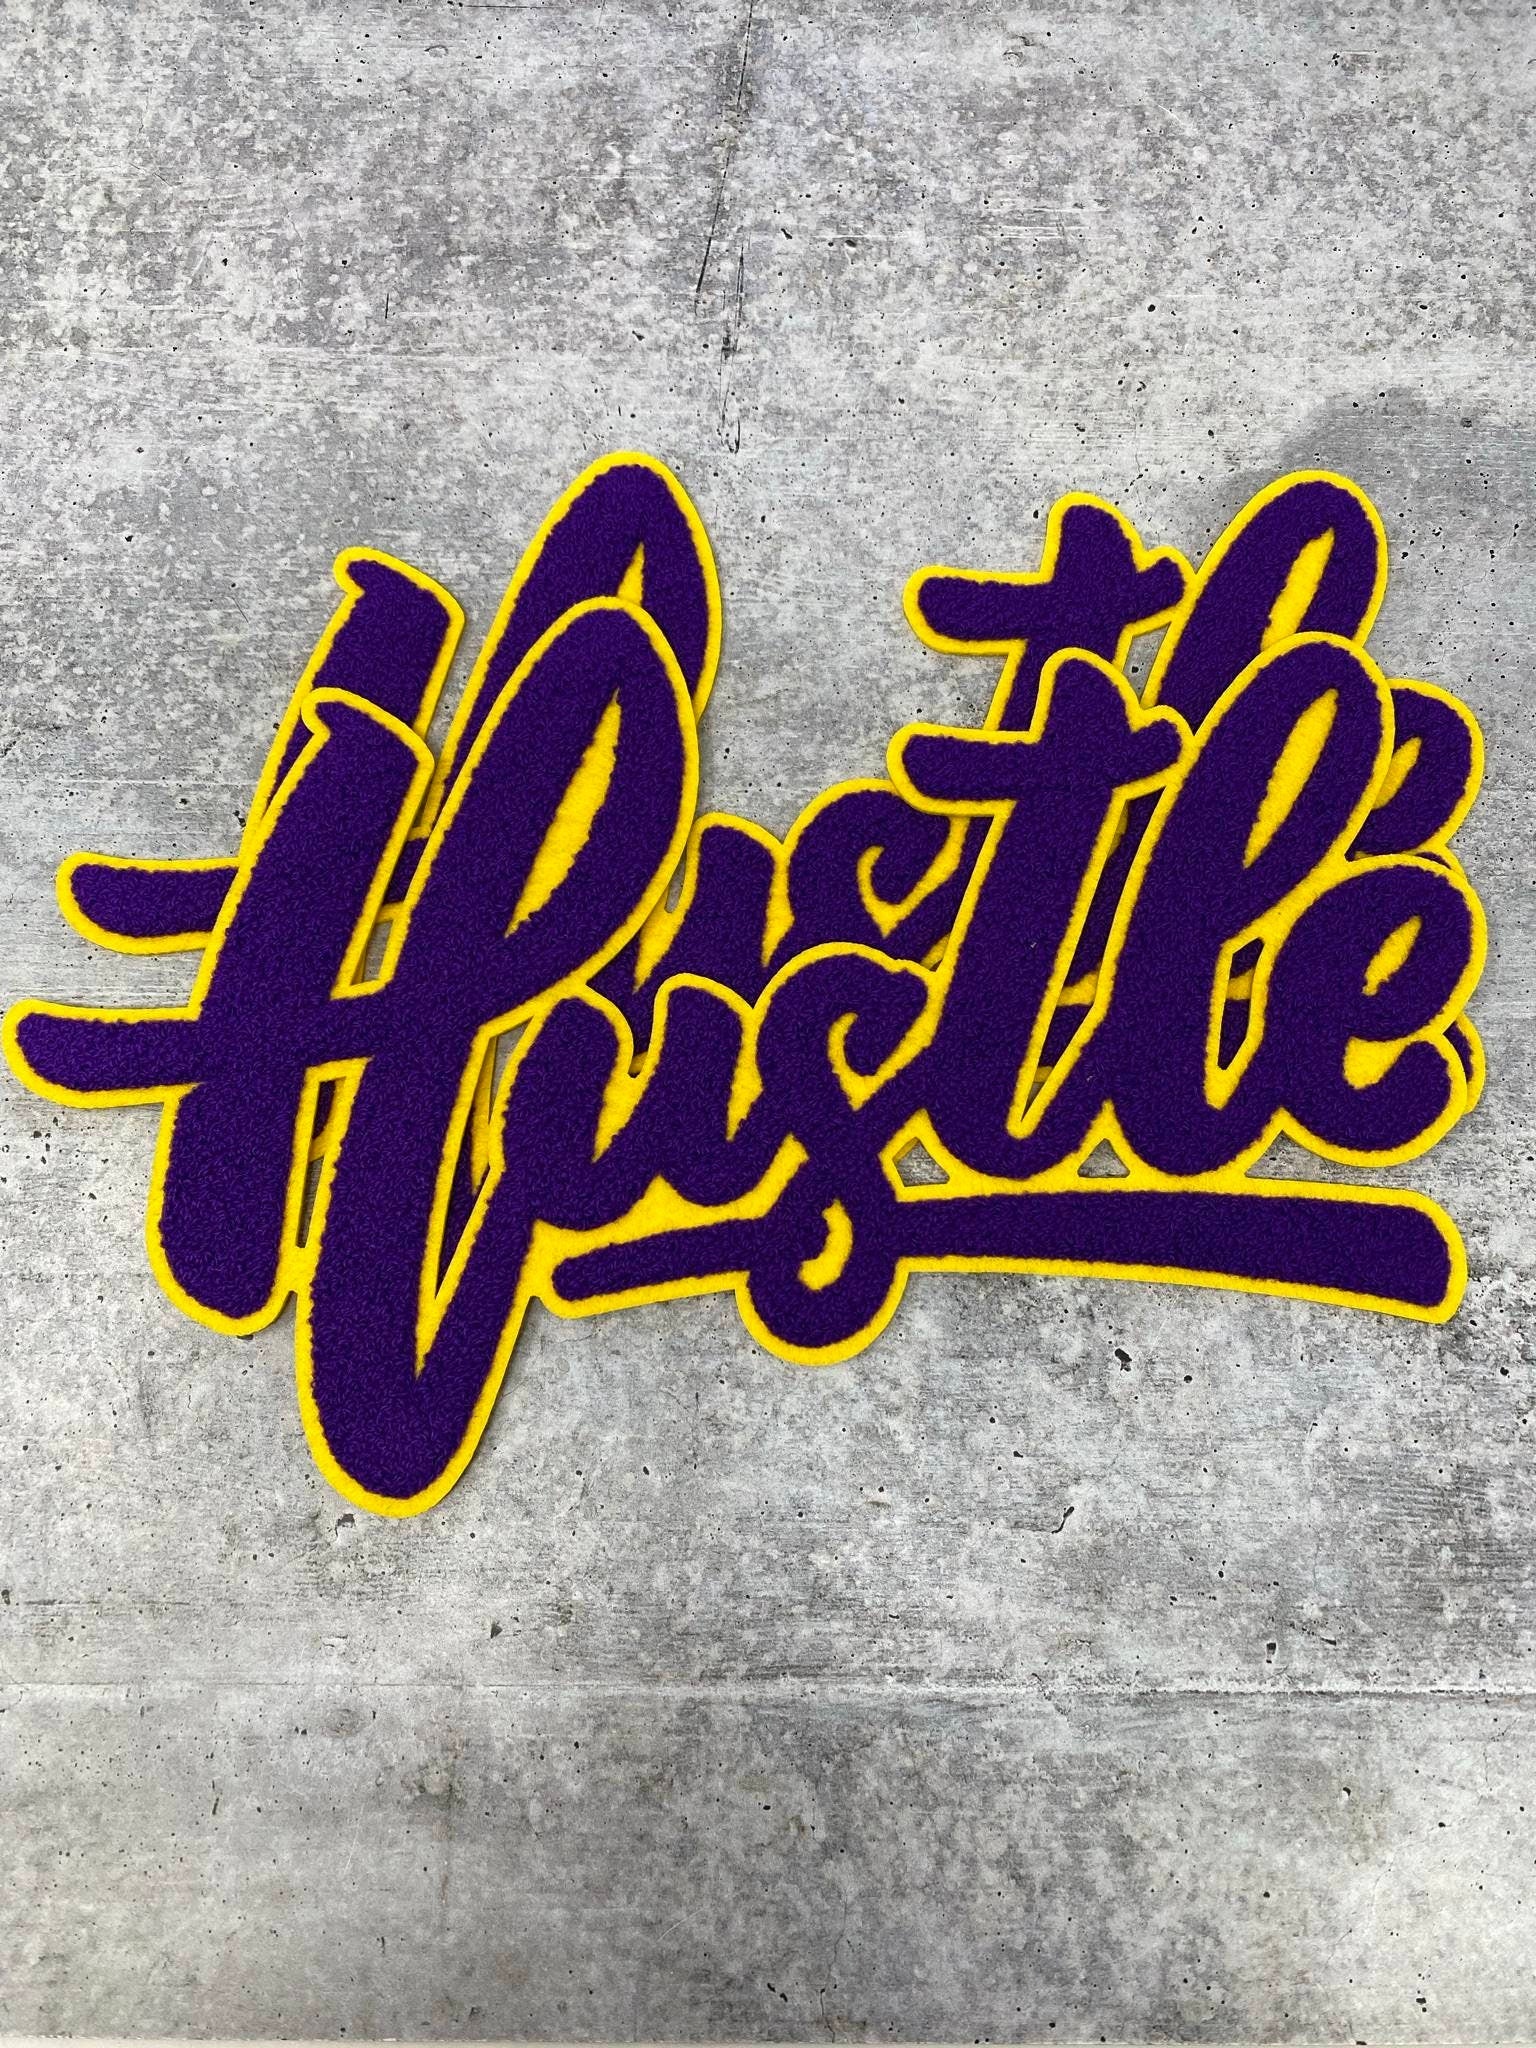 Exclusive, Purple & Gold "Hustle" Chenille Patch (iron-on) Size 10"x8", Varsity Patch for Denim, Shirts and Hoodies, Large Patch